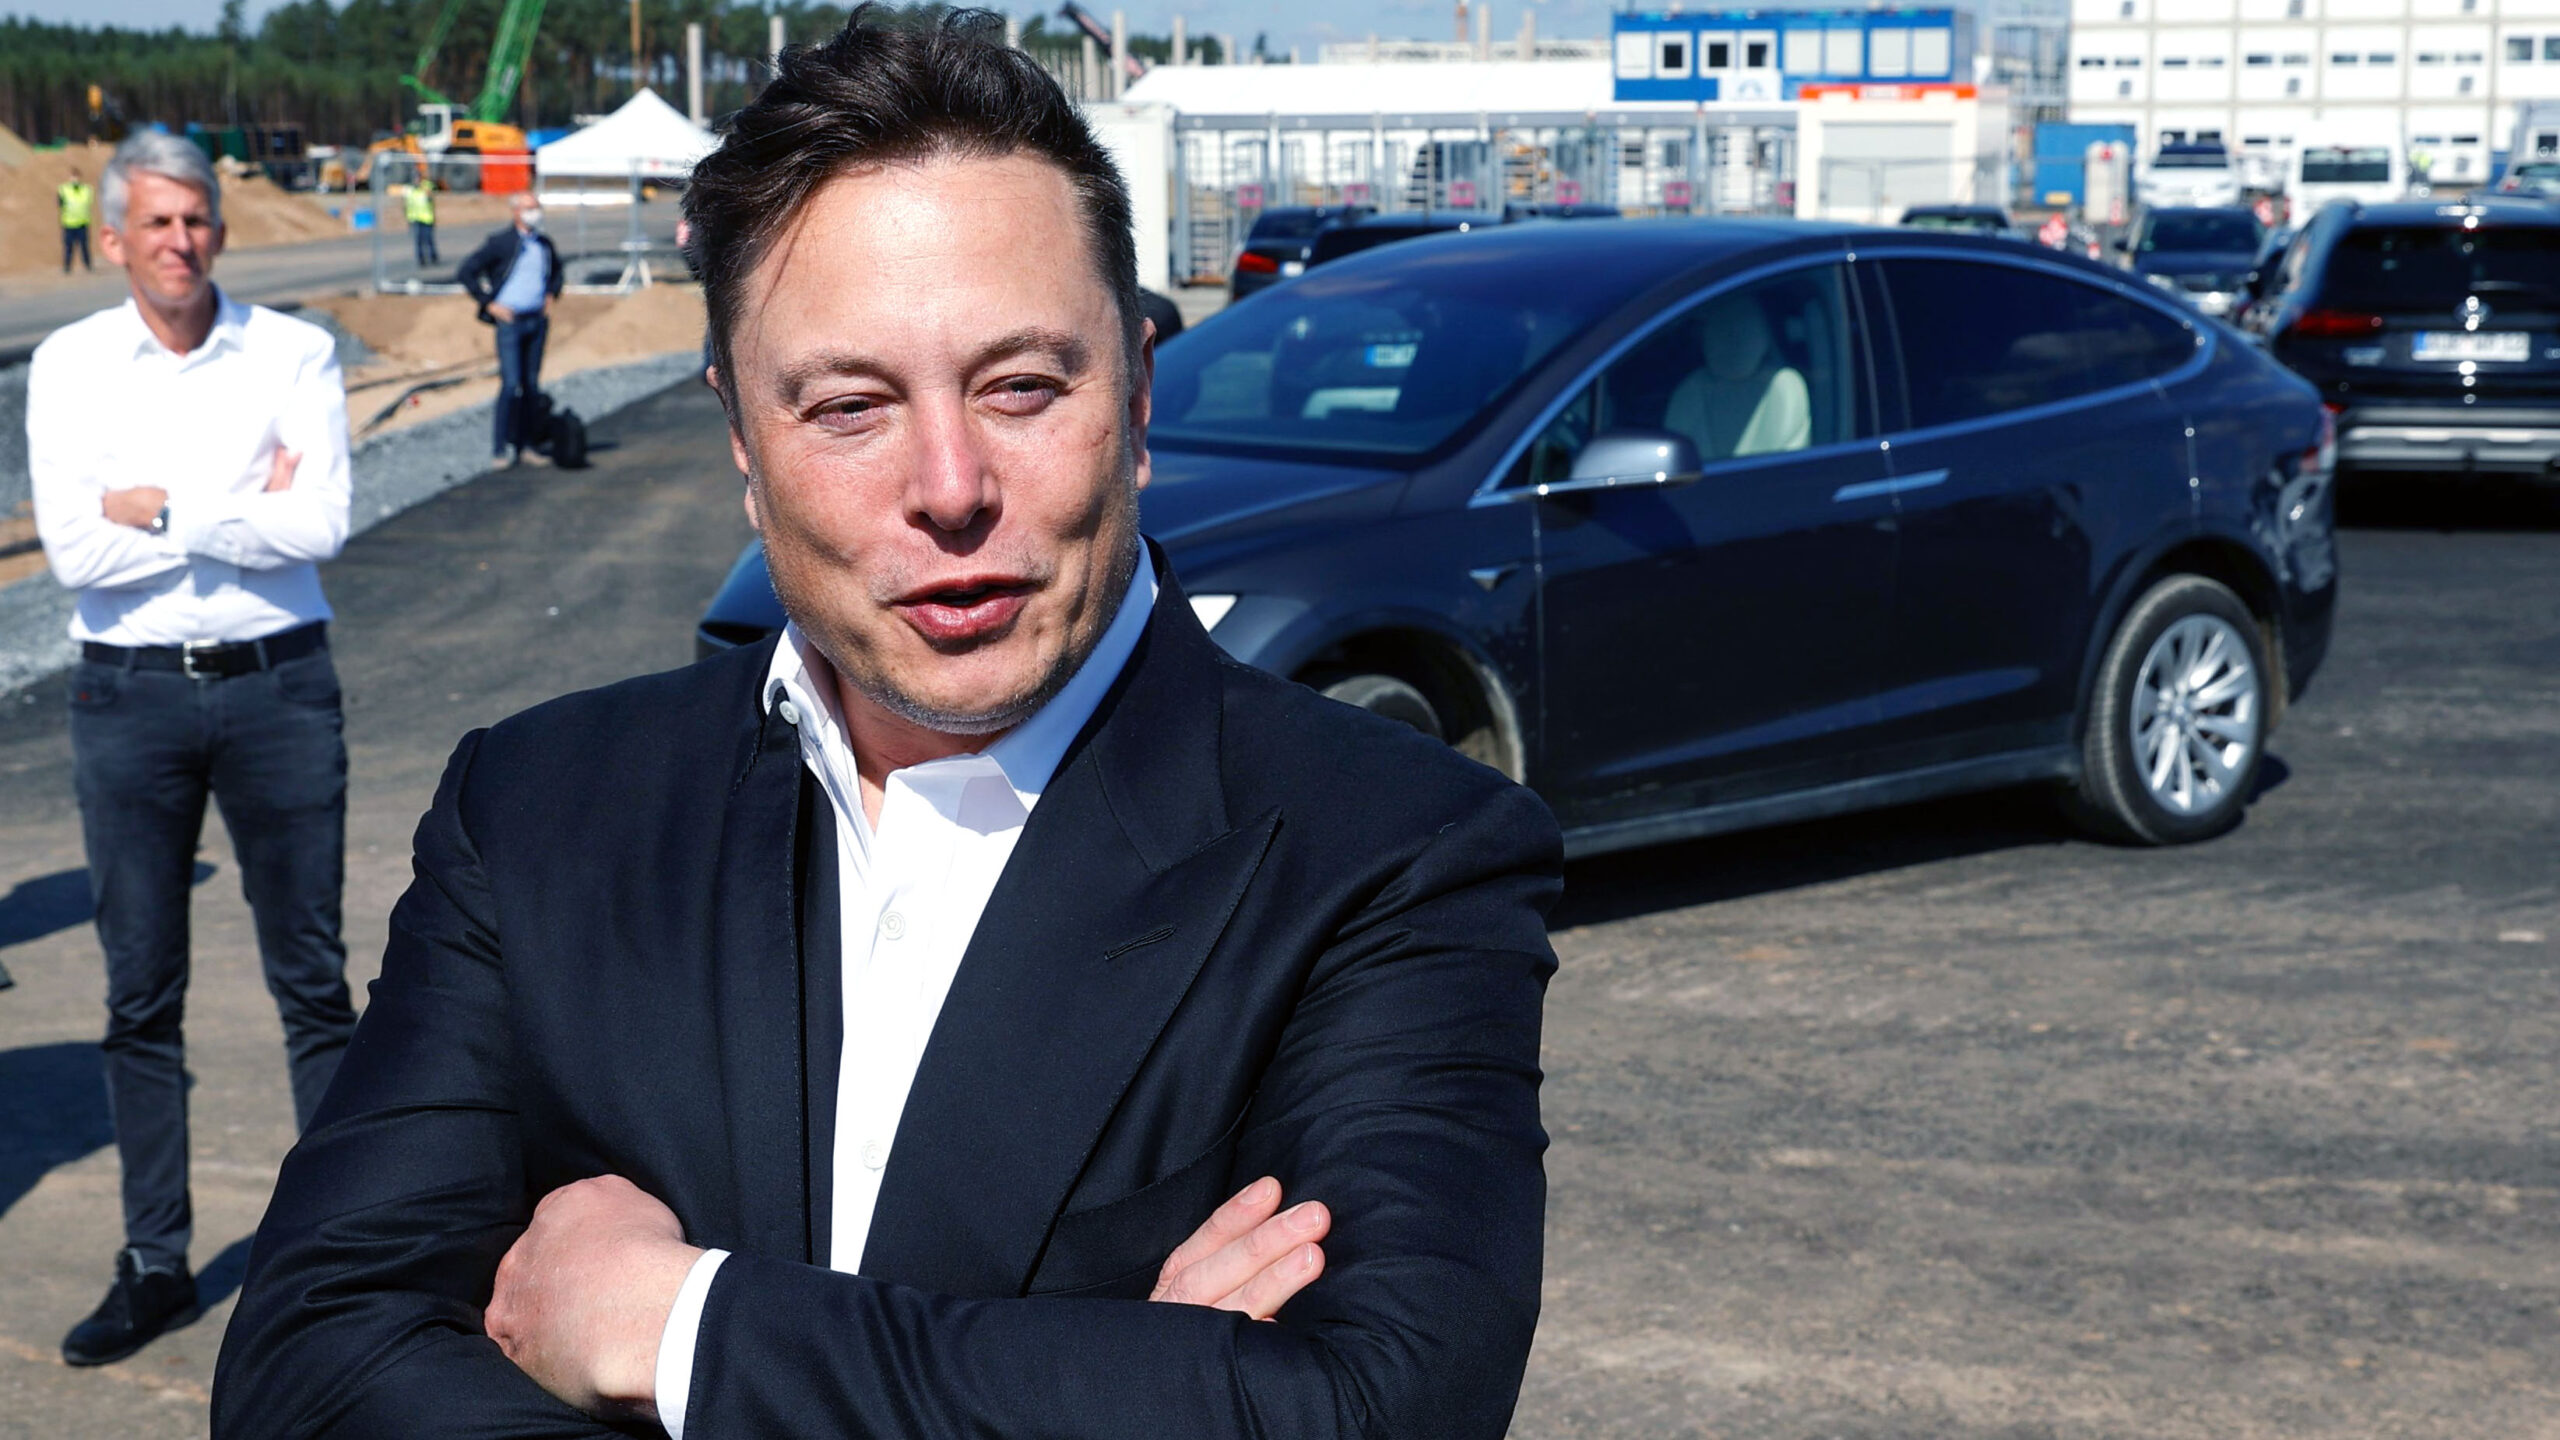 BREAKING: Elon Musk Officially Takes Over Twitter As Sale Is Now Final, Top Execs Fired, Report Says